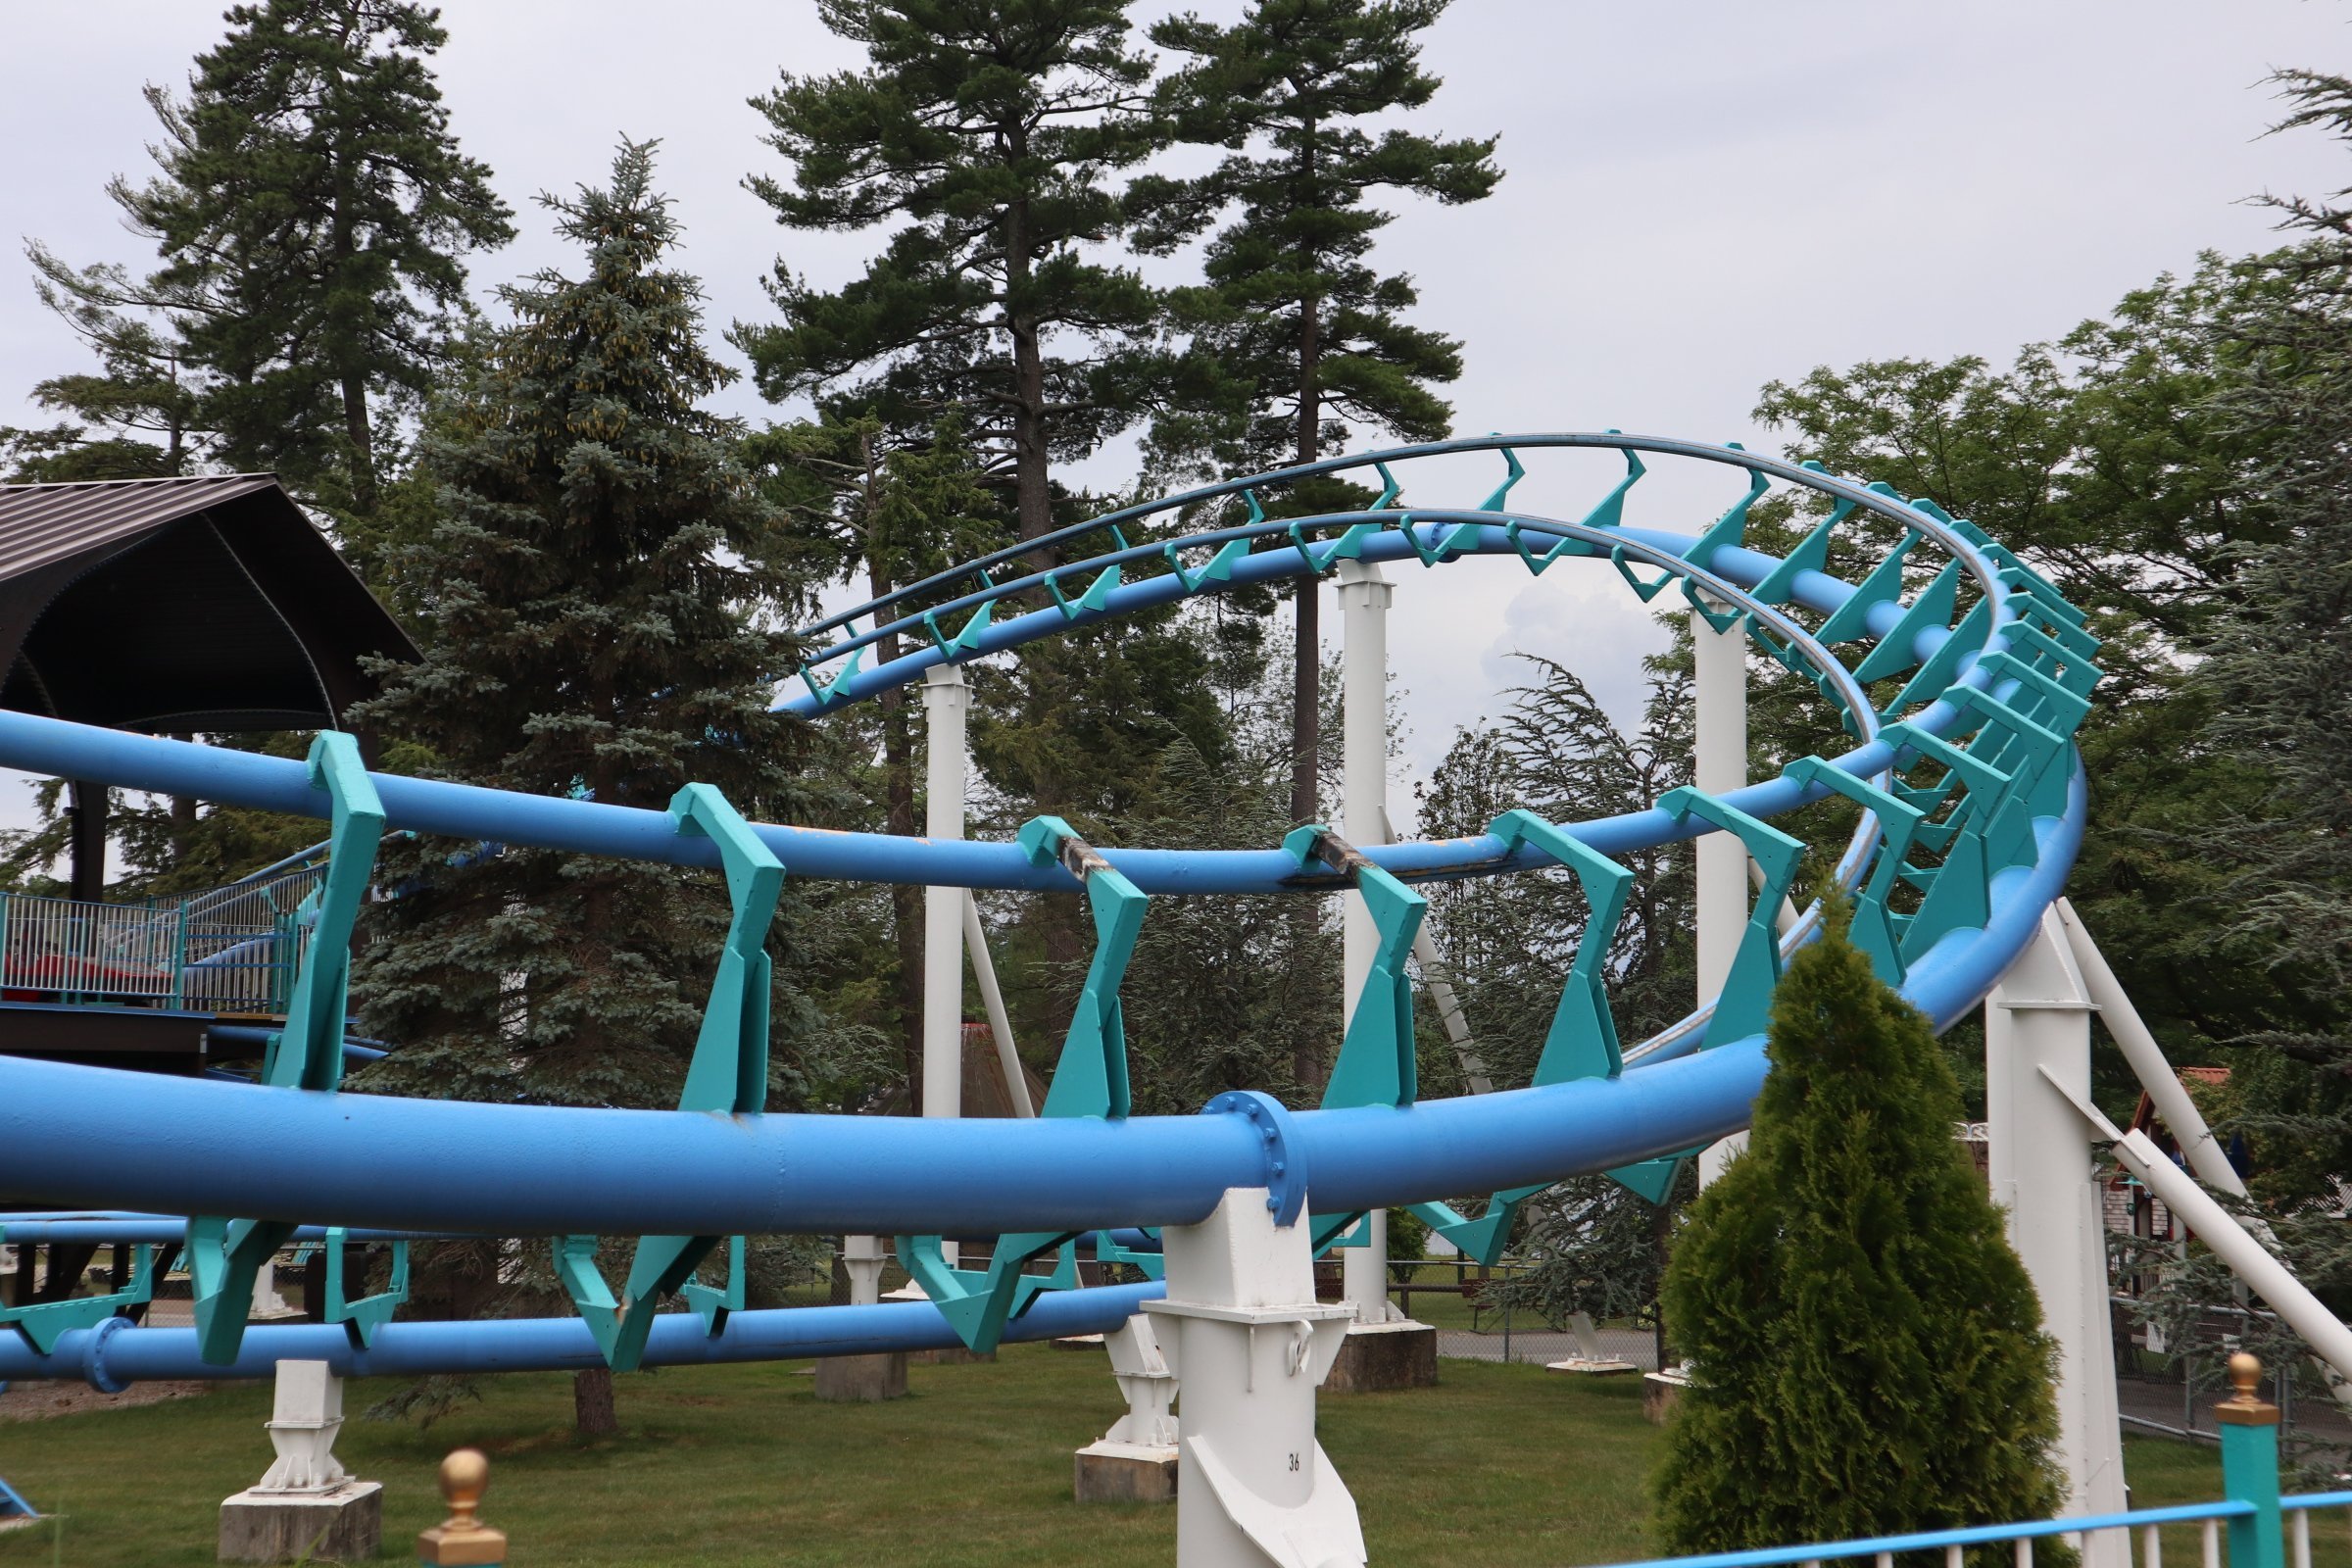 Canobie Lake Park: Ultimate Fun for the Entire Family (Review)